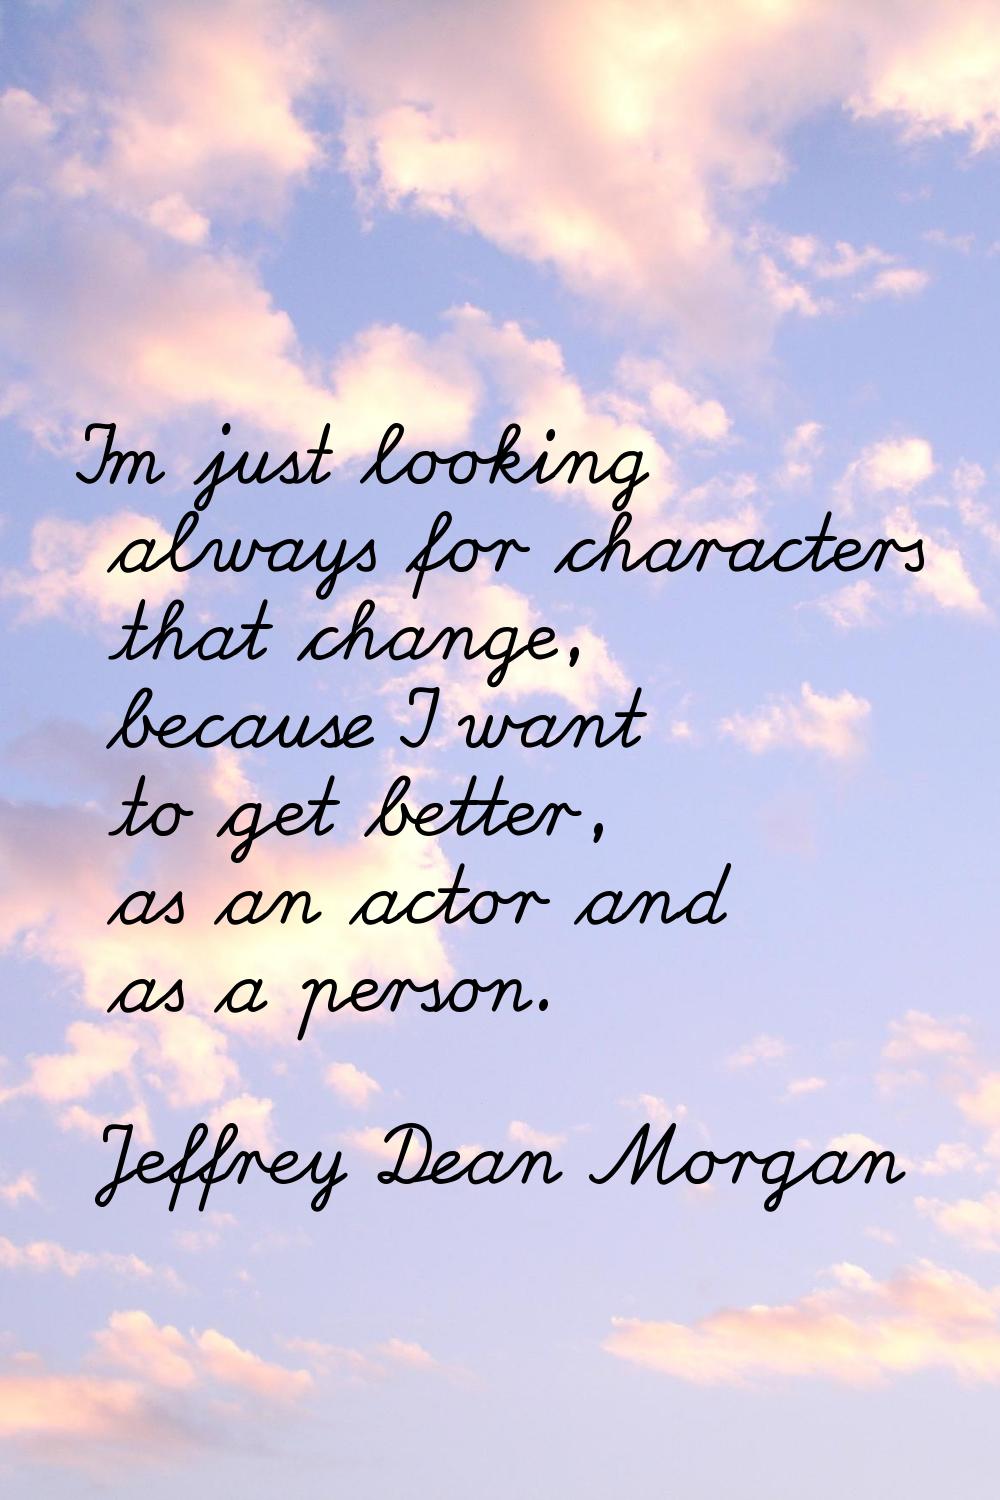 I'm just looking always for characters that change, because I want to get better, as an actor and a